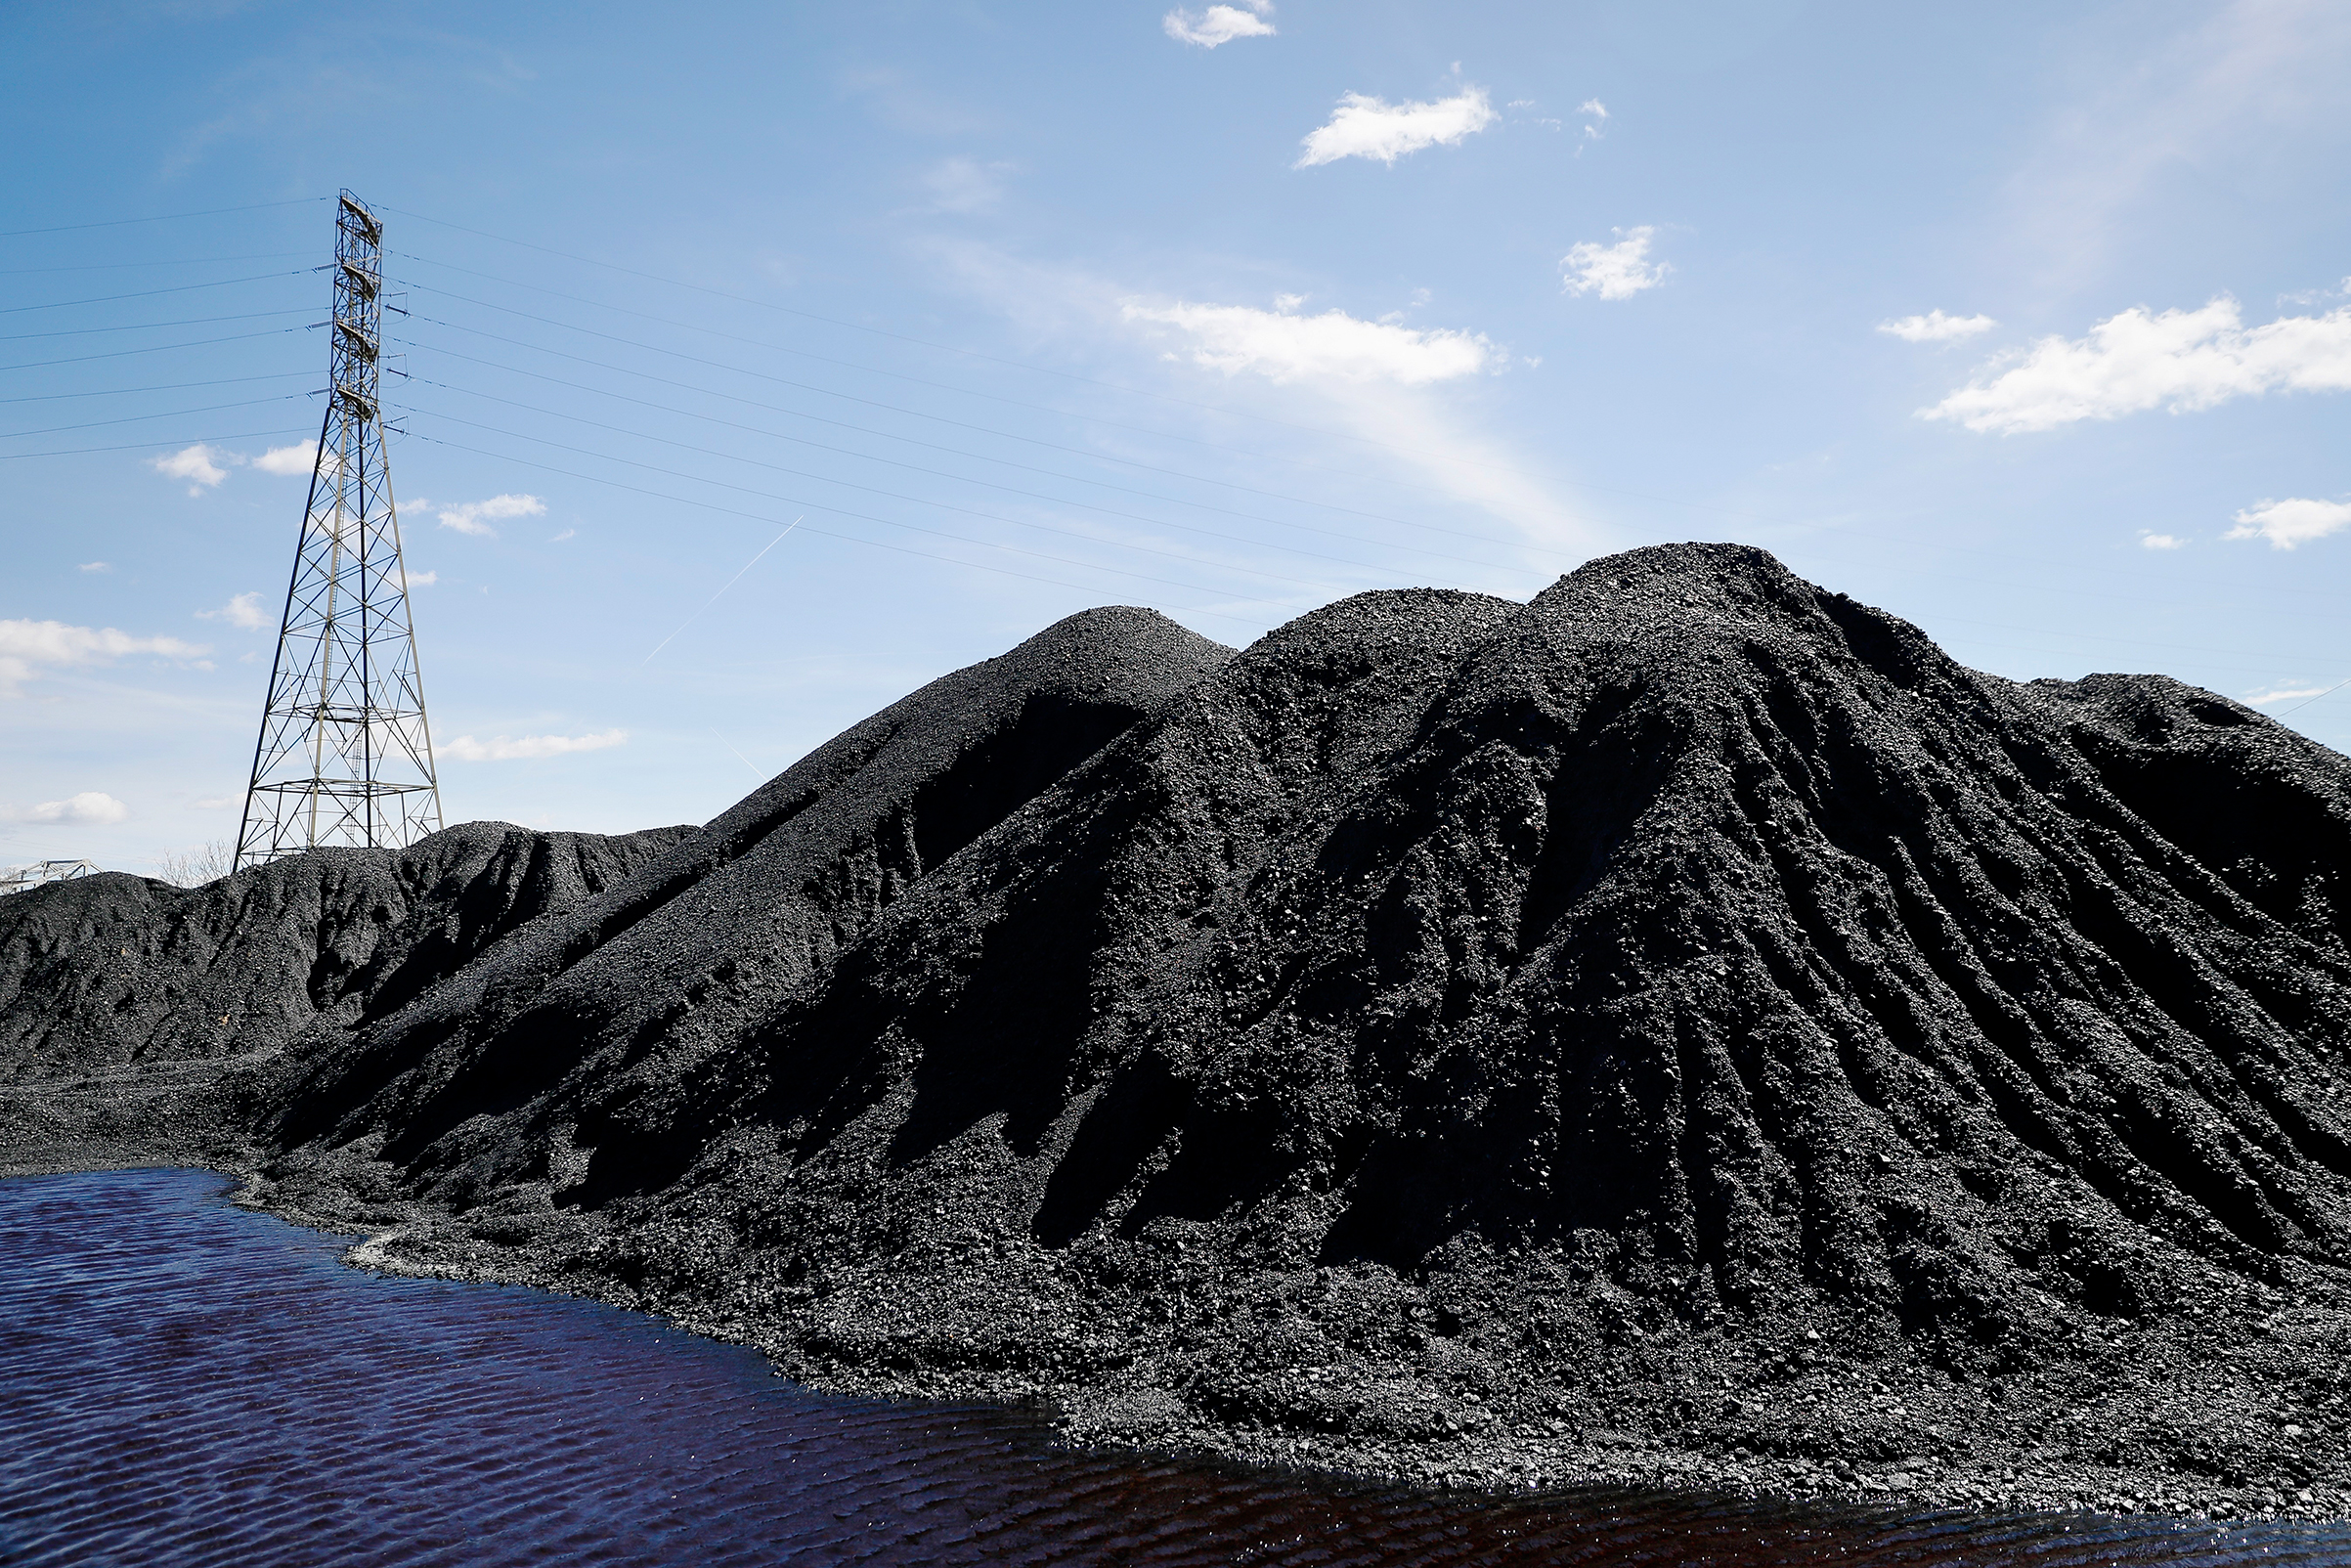 Power lines loom behind piles of coal stored at a facility along the Ohio River in April (John Minchillo—AP)